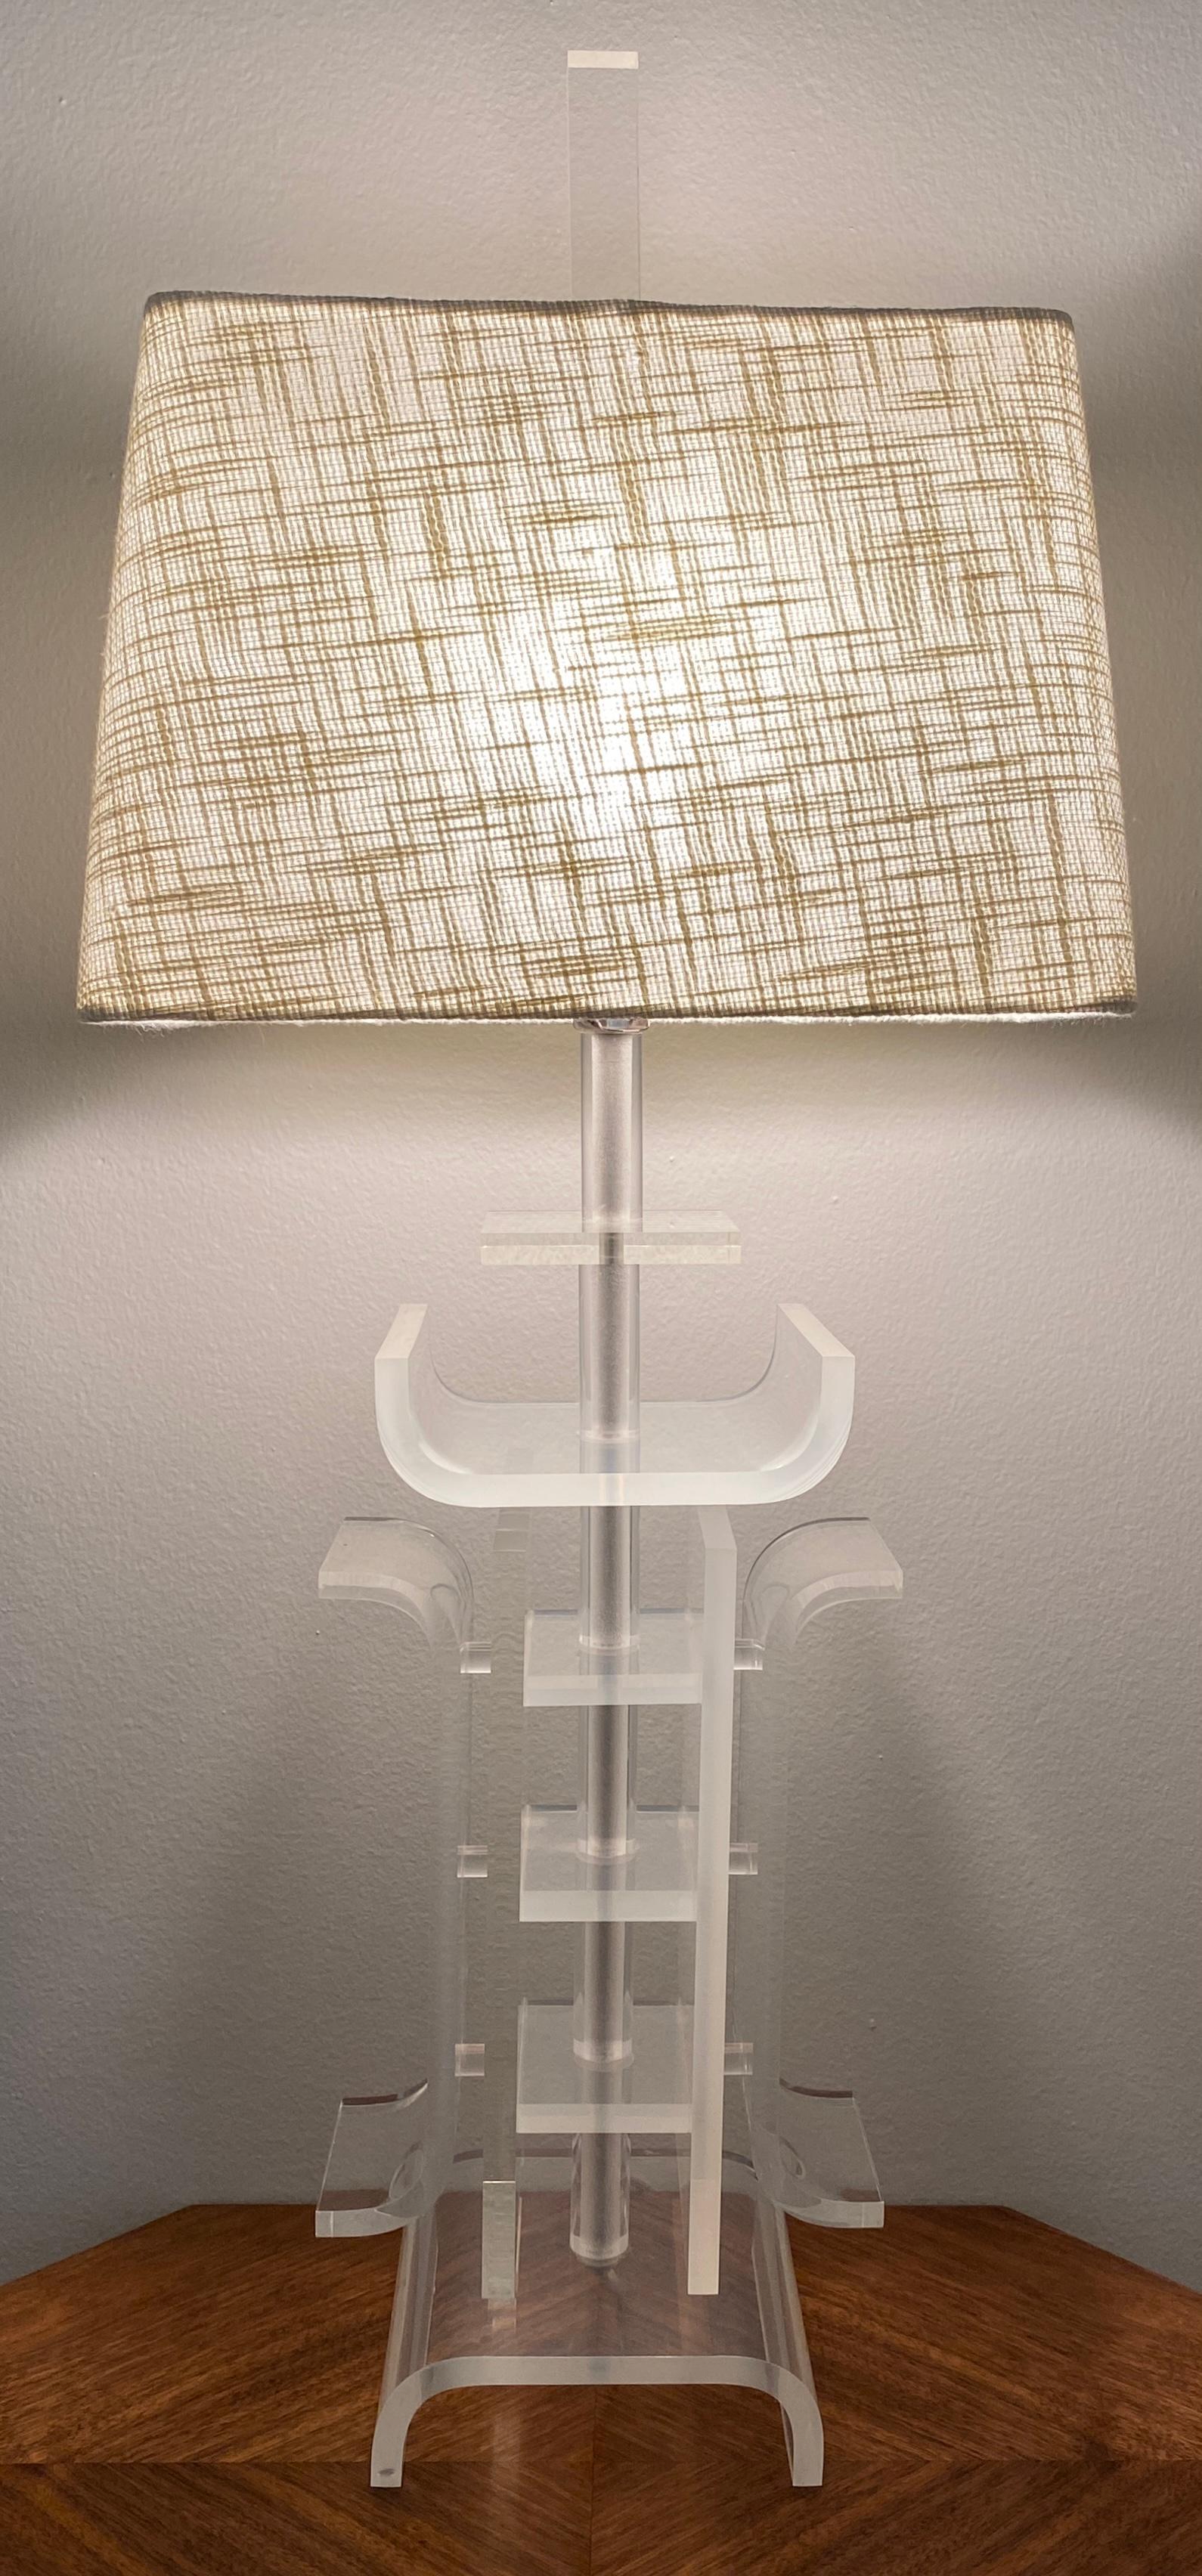 Rare and beautiful Charles Hollis Jones lucite table lamp. This stylish designed table lamp features alternating blocks of clear lucite accentuated by a lucite finial. The base is uniquely inspired by Japanese architectural designs. 

This gorgeous